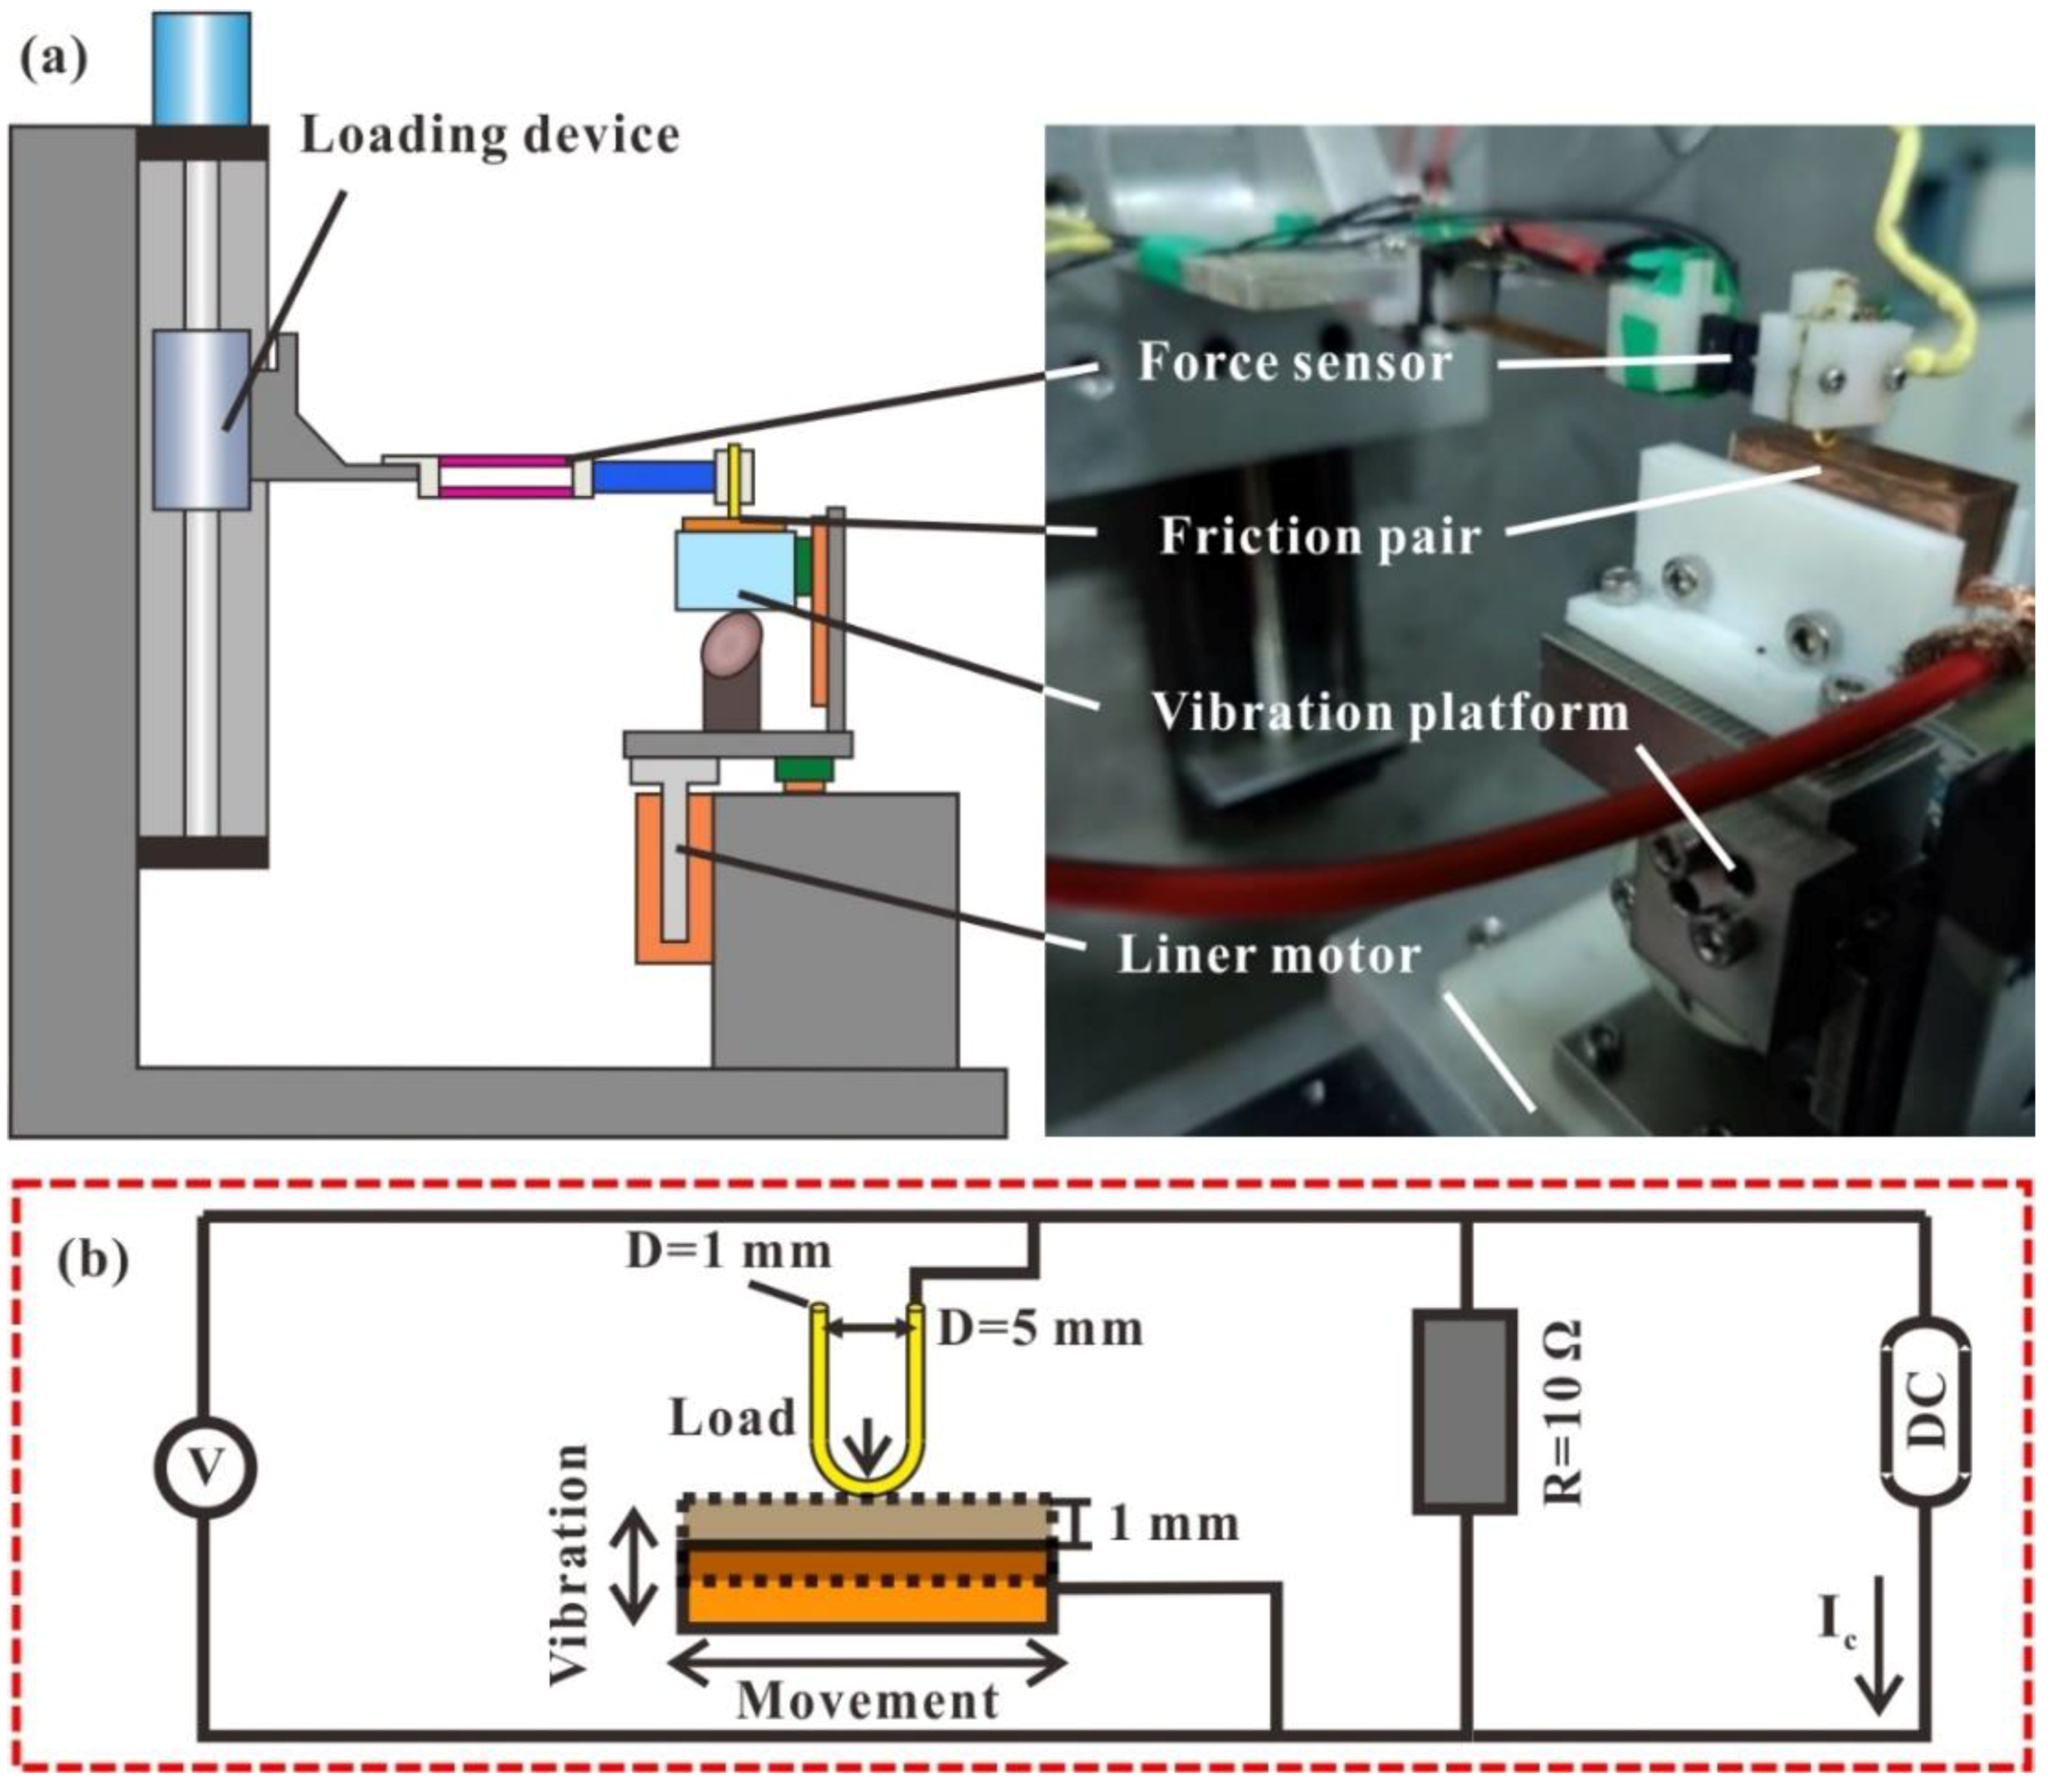 Materials | Free Full-Text | Electrical Contact Performance of Cu Alloy  under Vibration Condition and Acetal Glue Environment | HTML  Motor Maul Wiring Diagram    MDPI